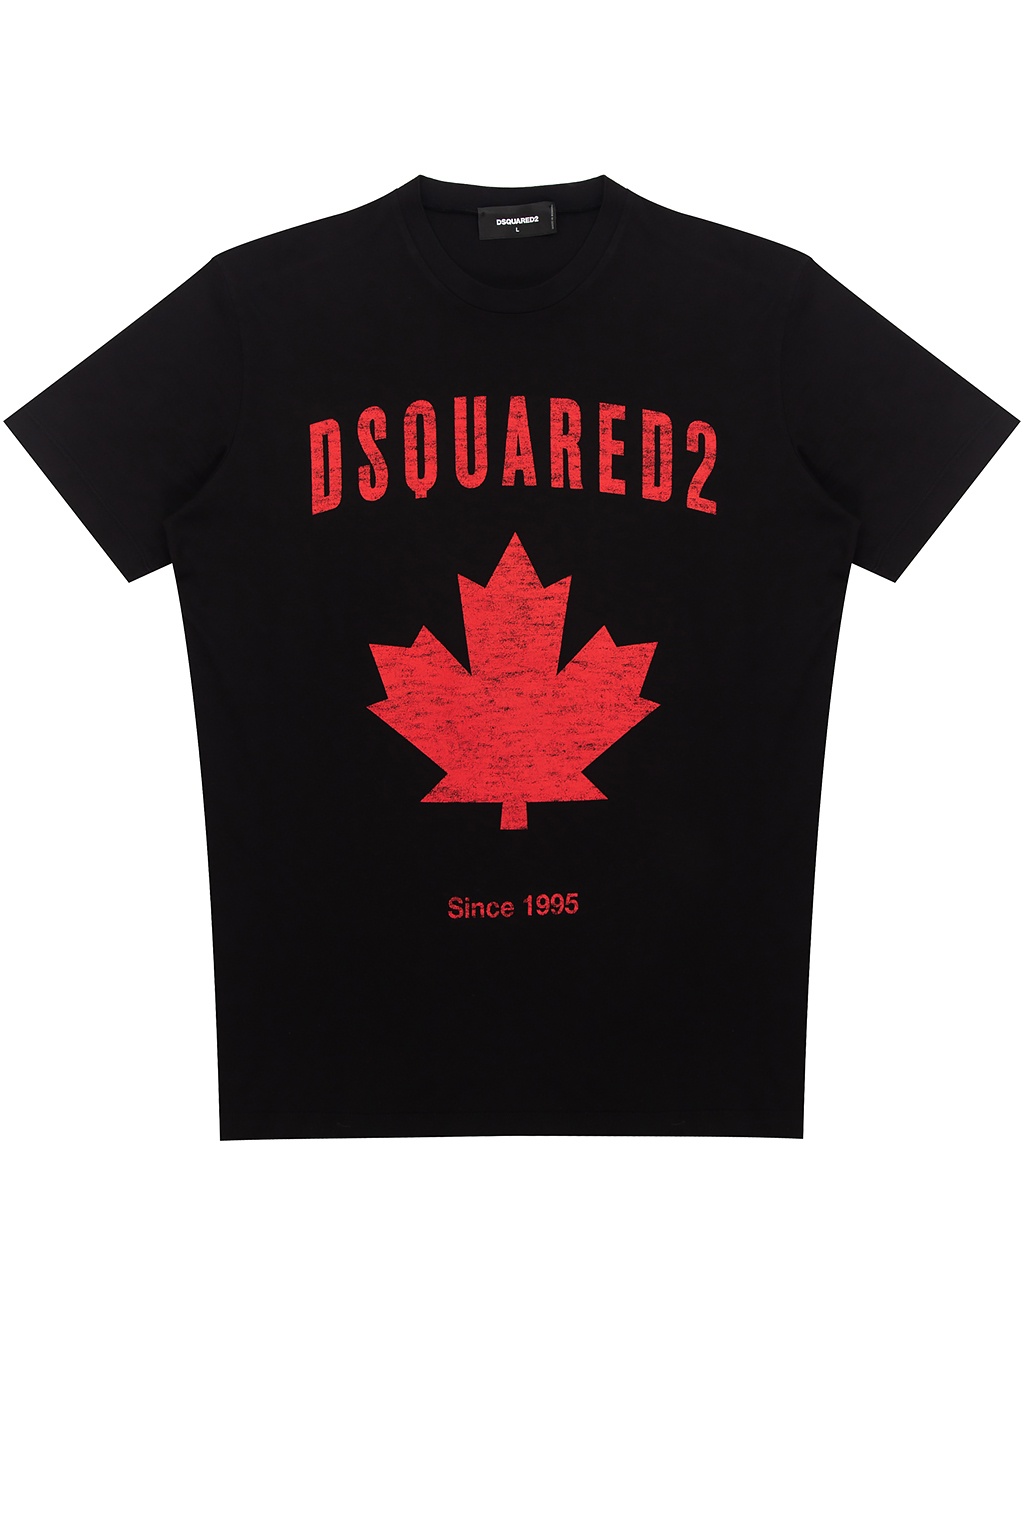 dsquared2 since 1995